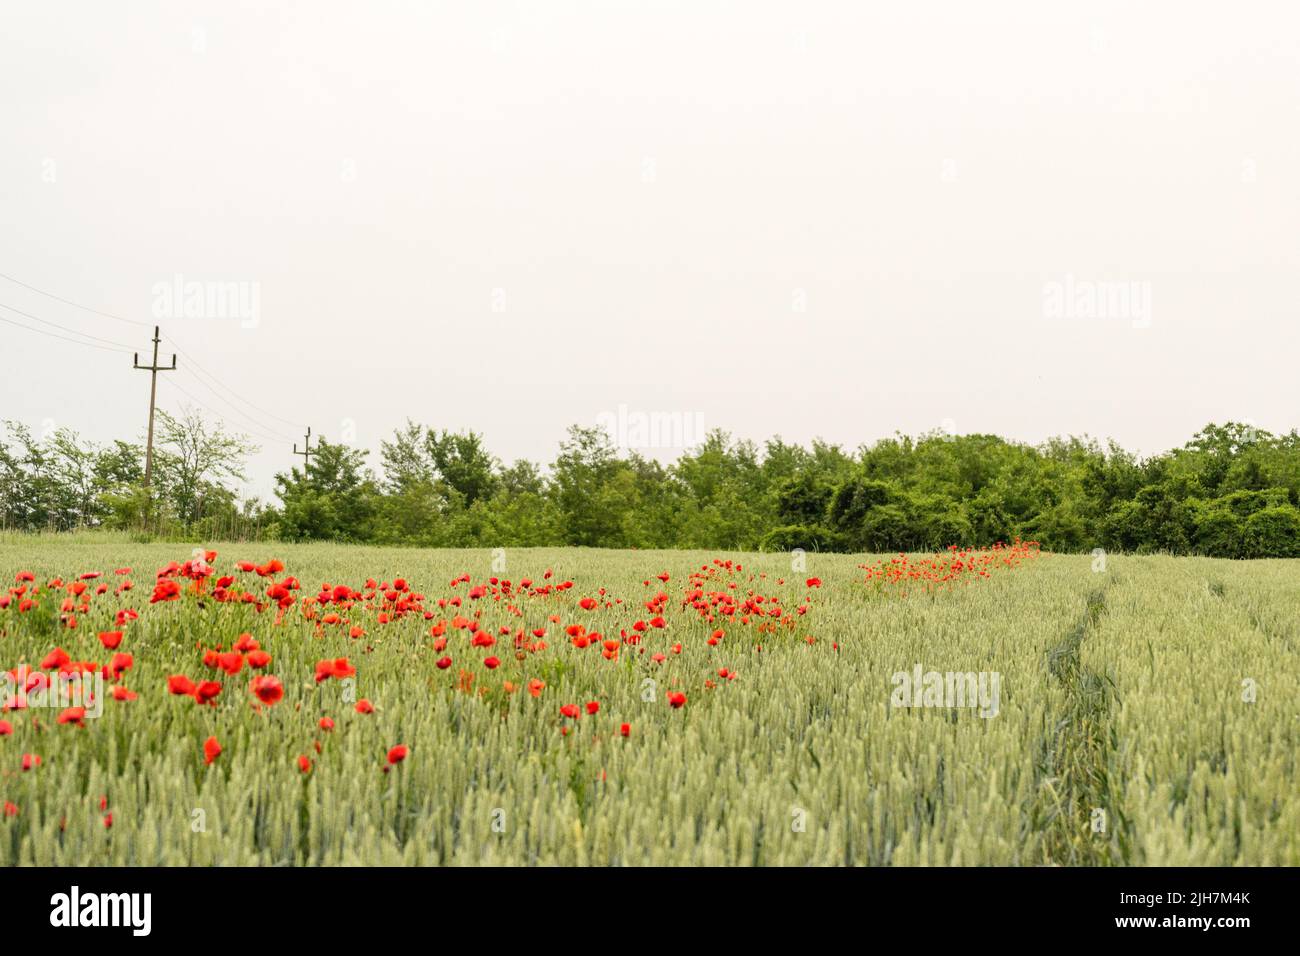 Blooming red common poppy flowers on a field with wheat. Stock Photo